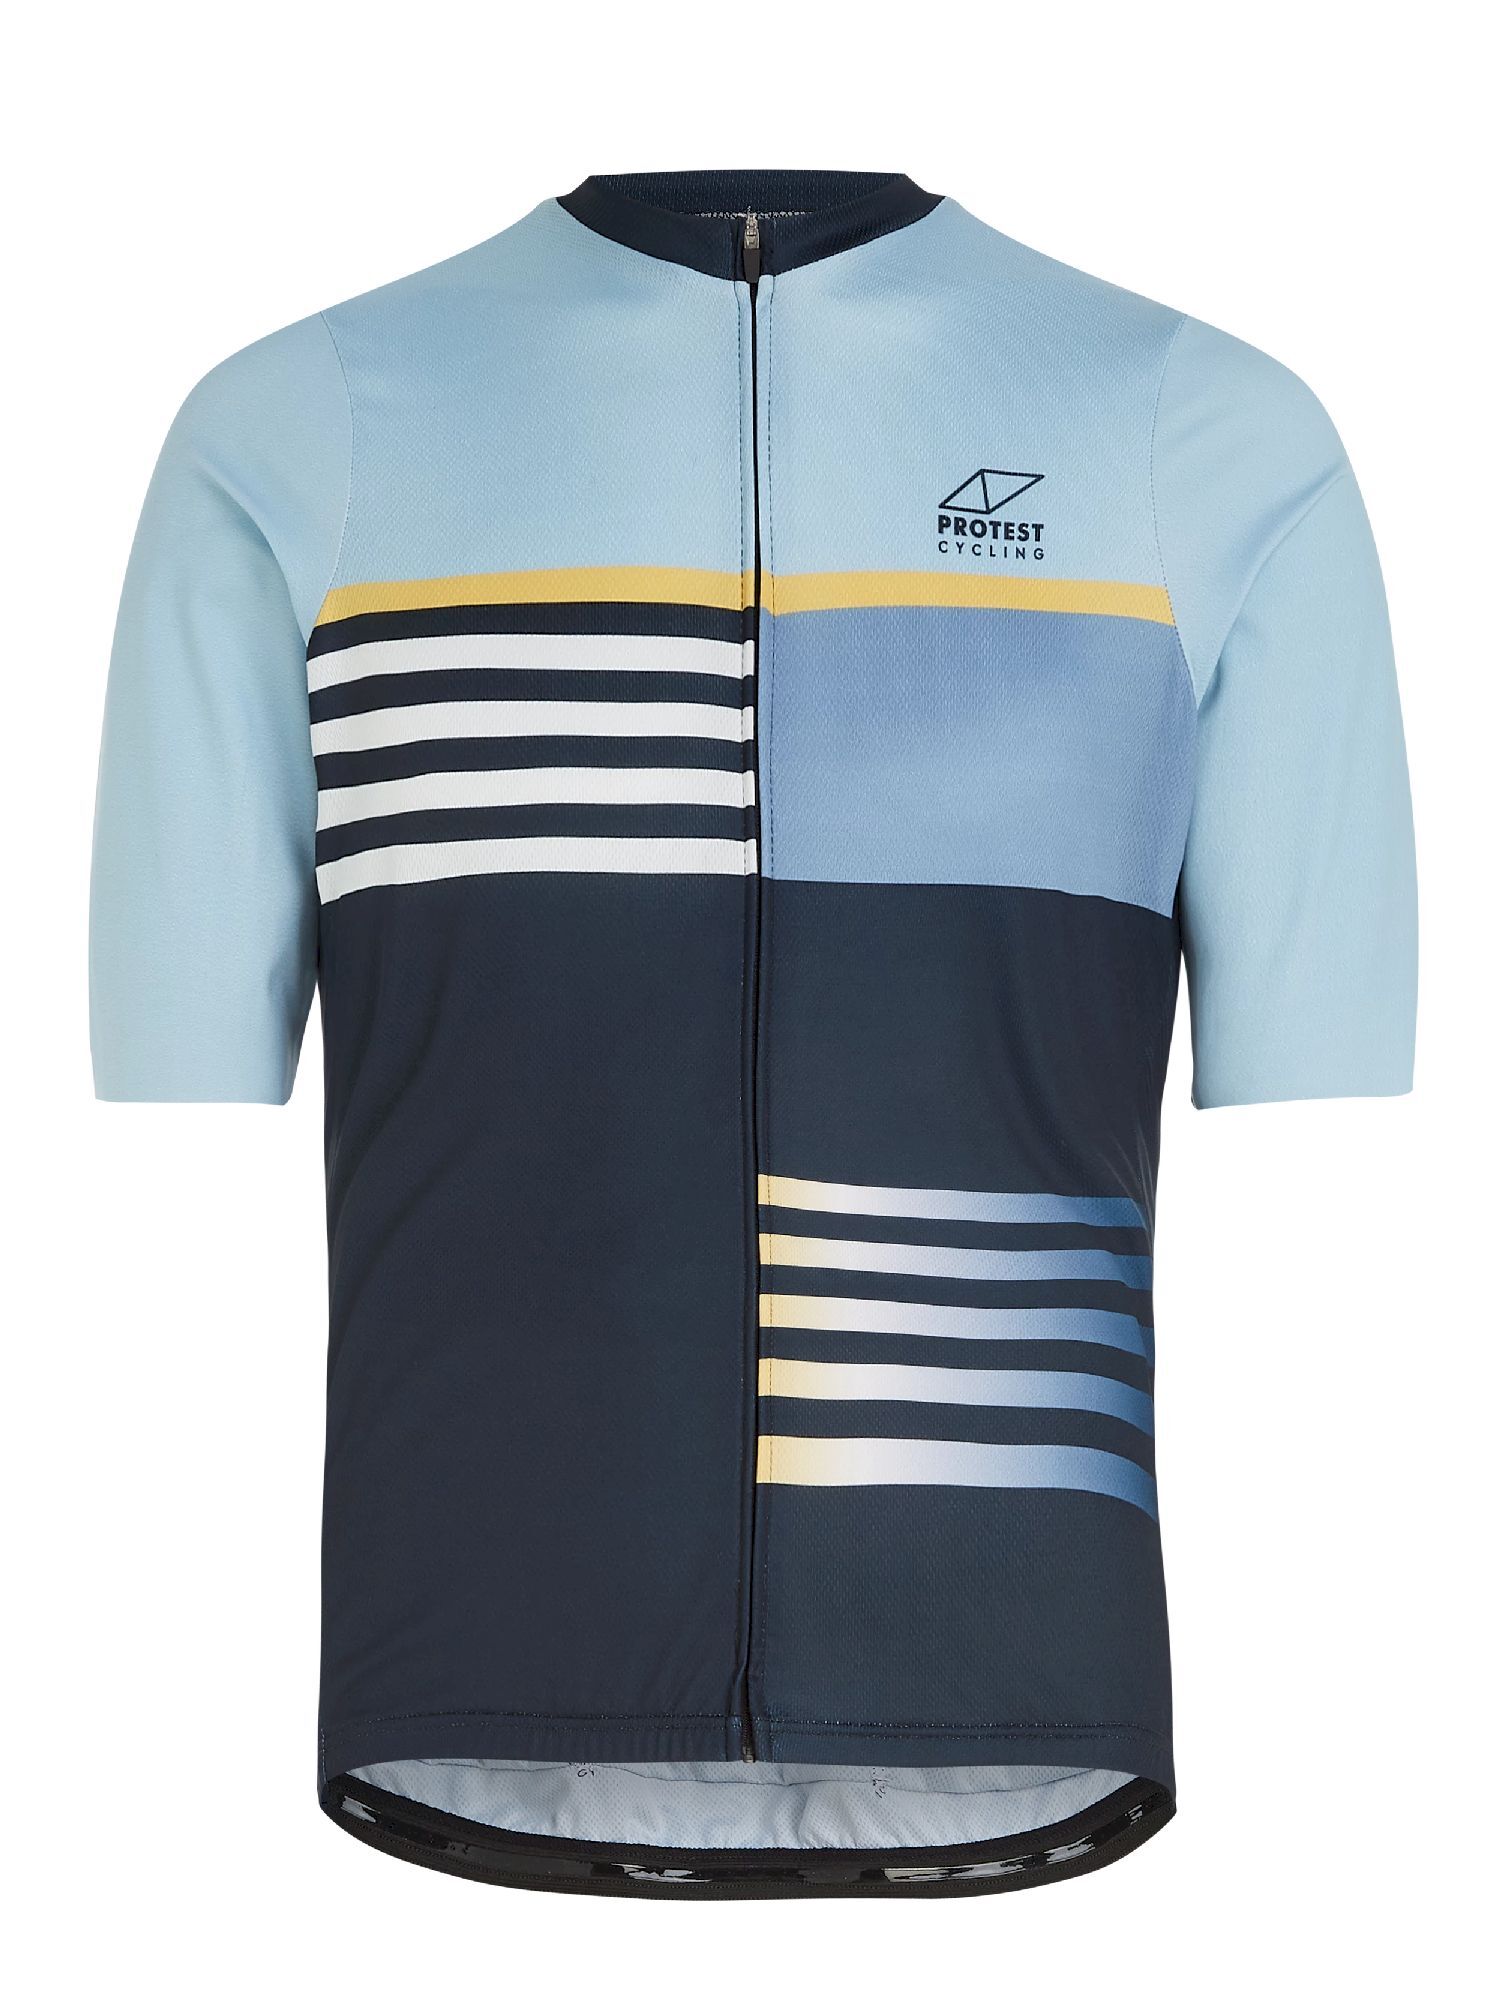 Protest Prthindes - Maillot ciclismo - Hombre | Hardloop